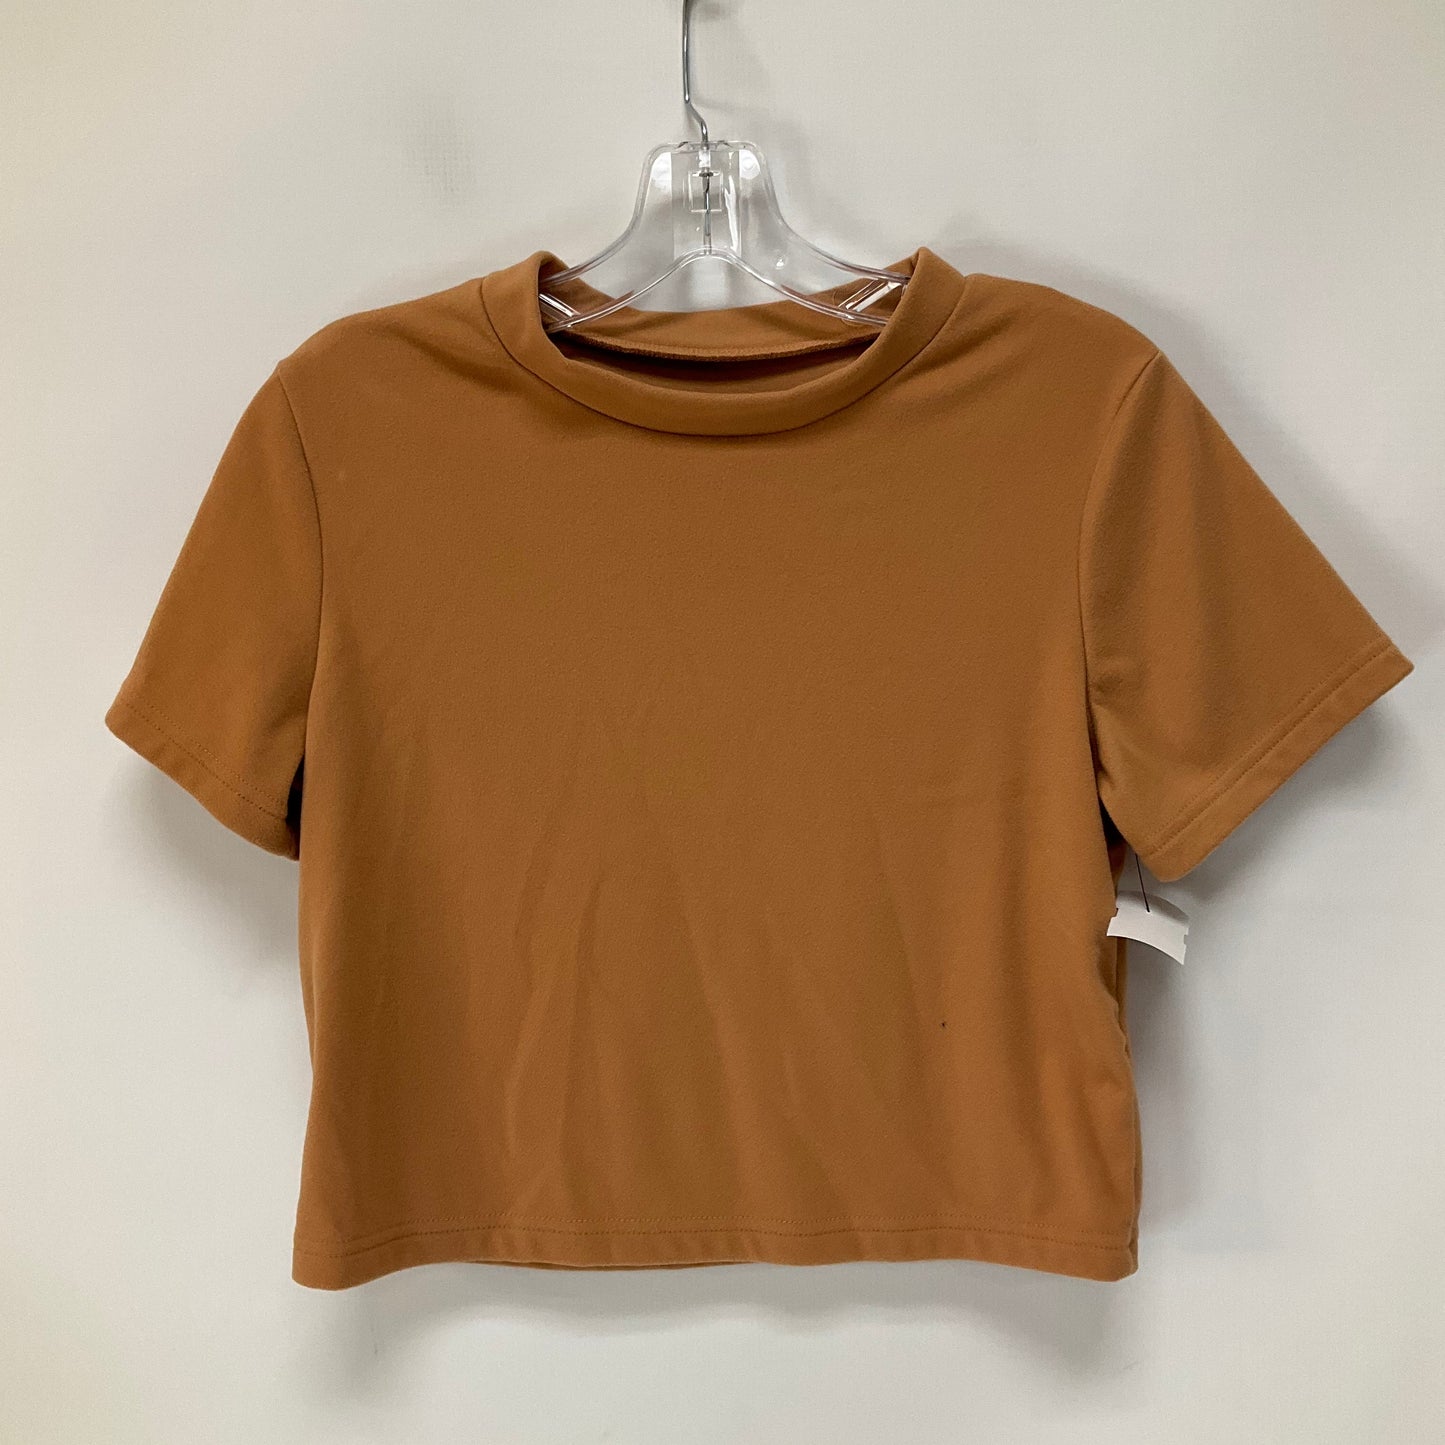 Orange Top 2pc Short Sleeve Clothes Mentor, Size S